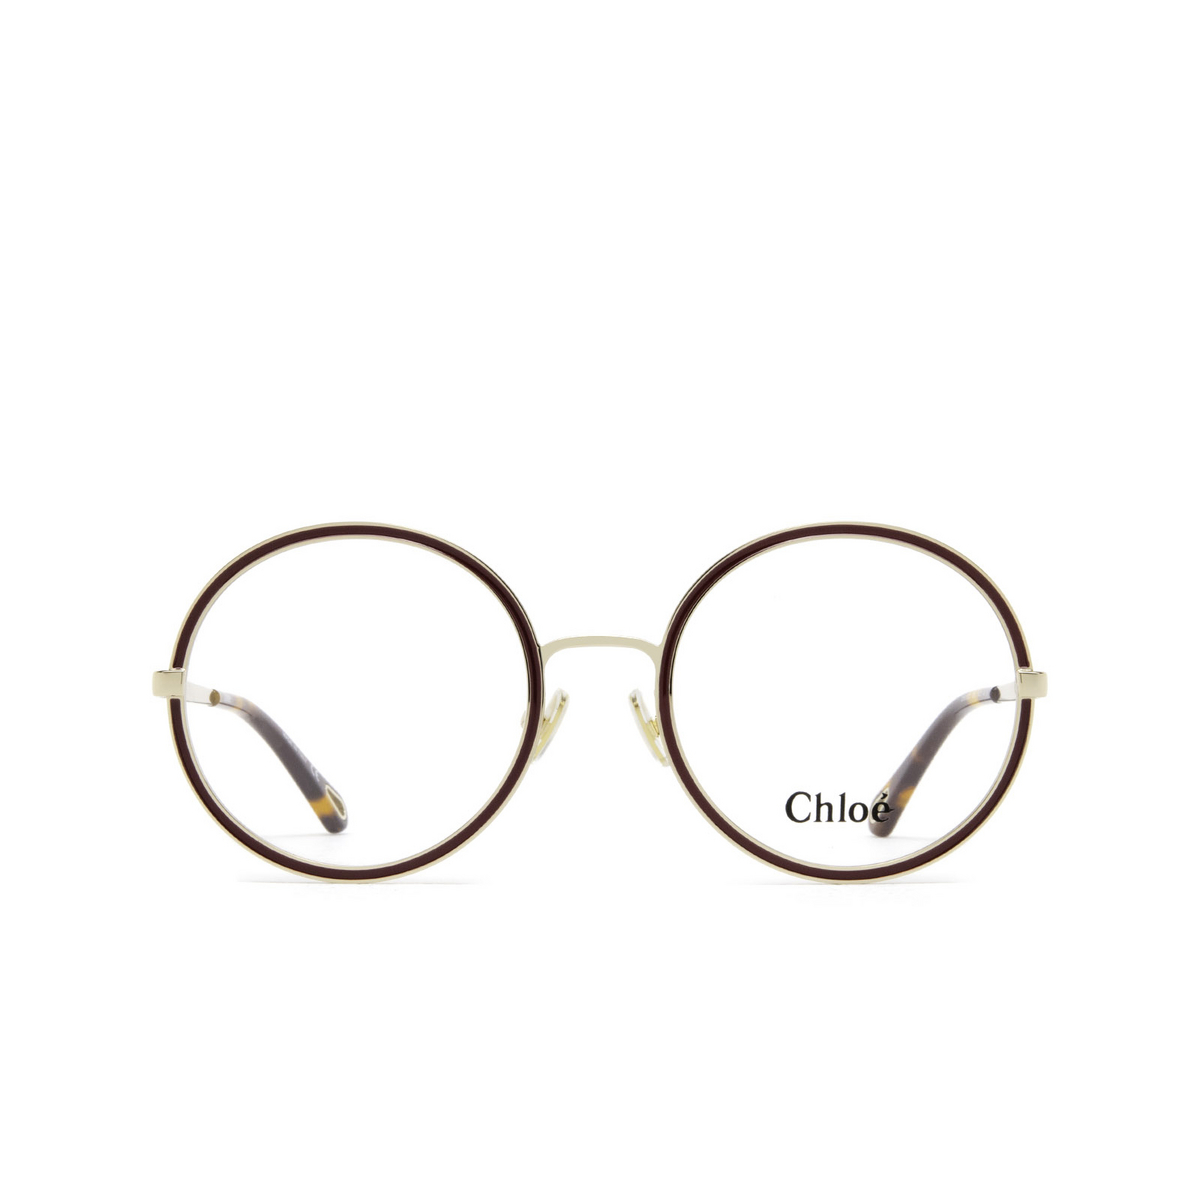 Chloé® Round Eyeglasses: CH0103O color 005 Gold & Burgundy - front view